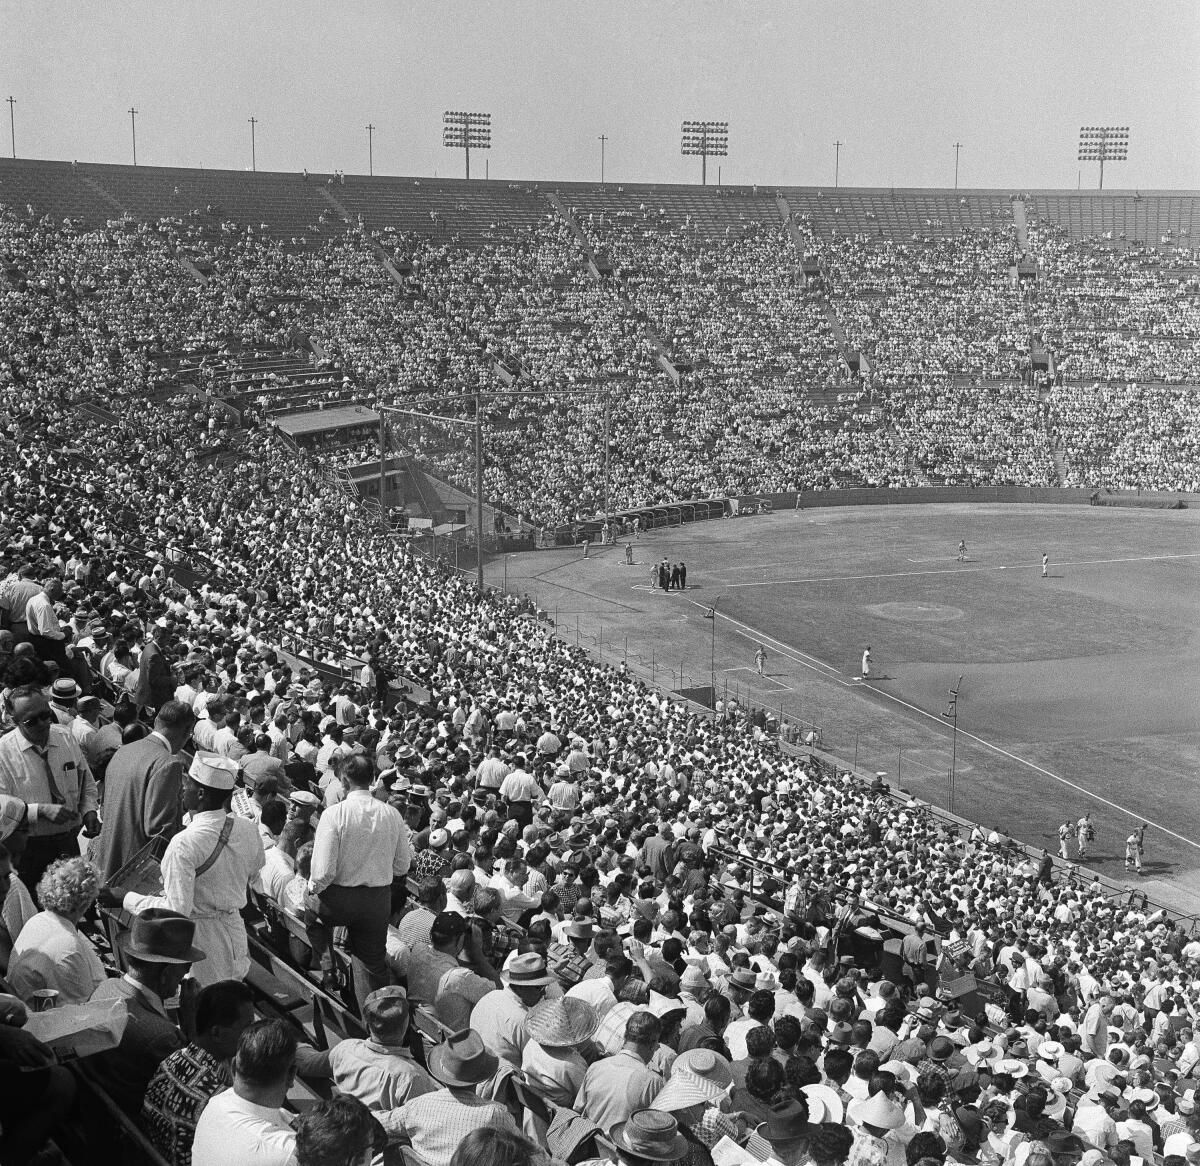 Fans file into the Coliseum for Game 2 of the 1959 tiebreaker series between the Dodgers and the Milwaukee Braves.